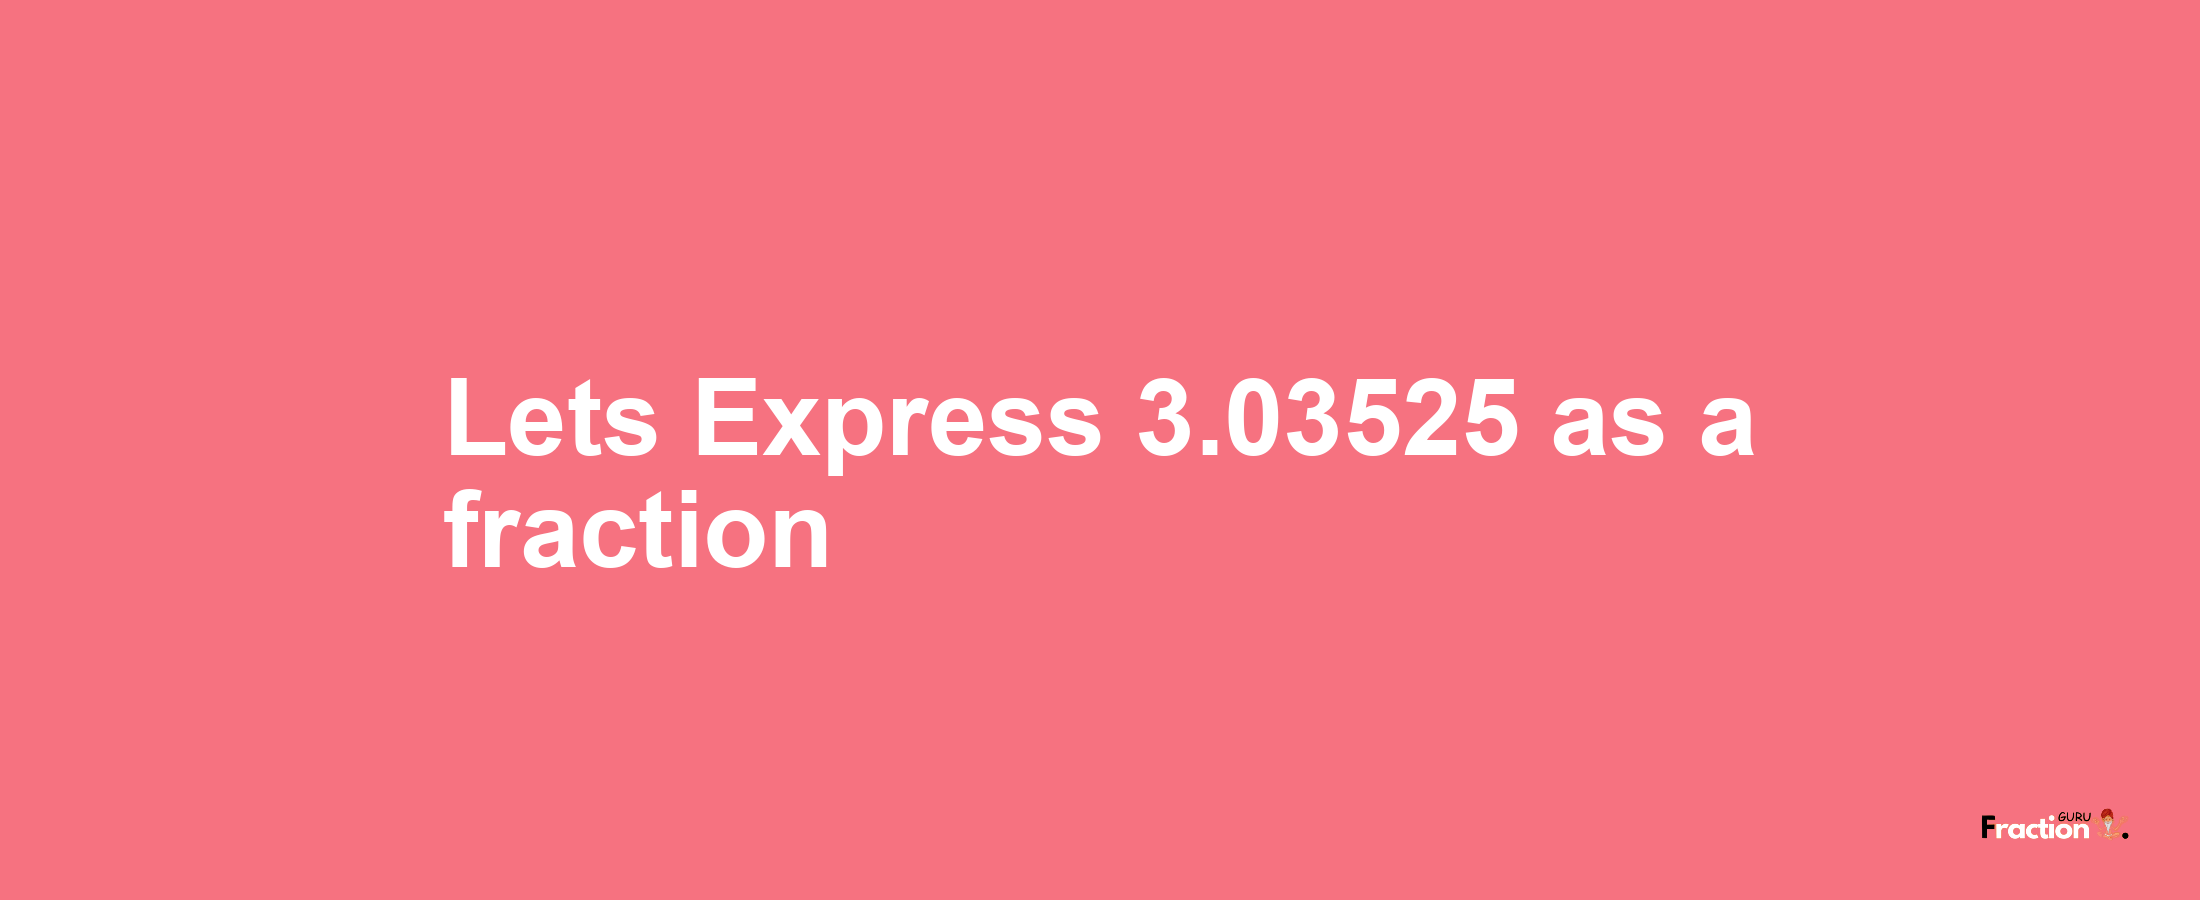 Lets Express 3.03525 as afraction